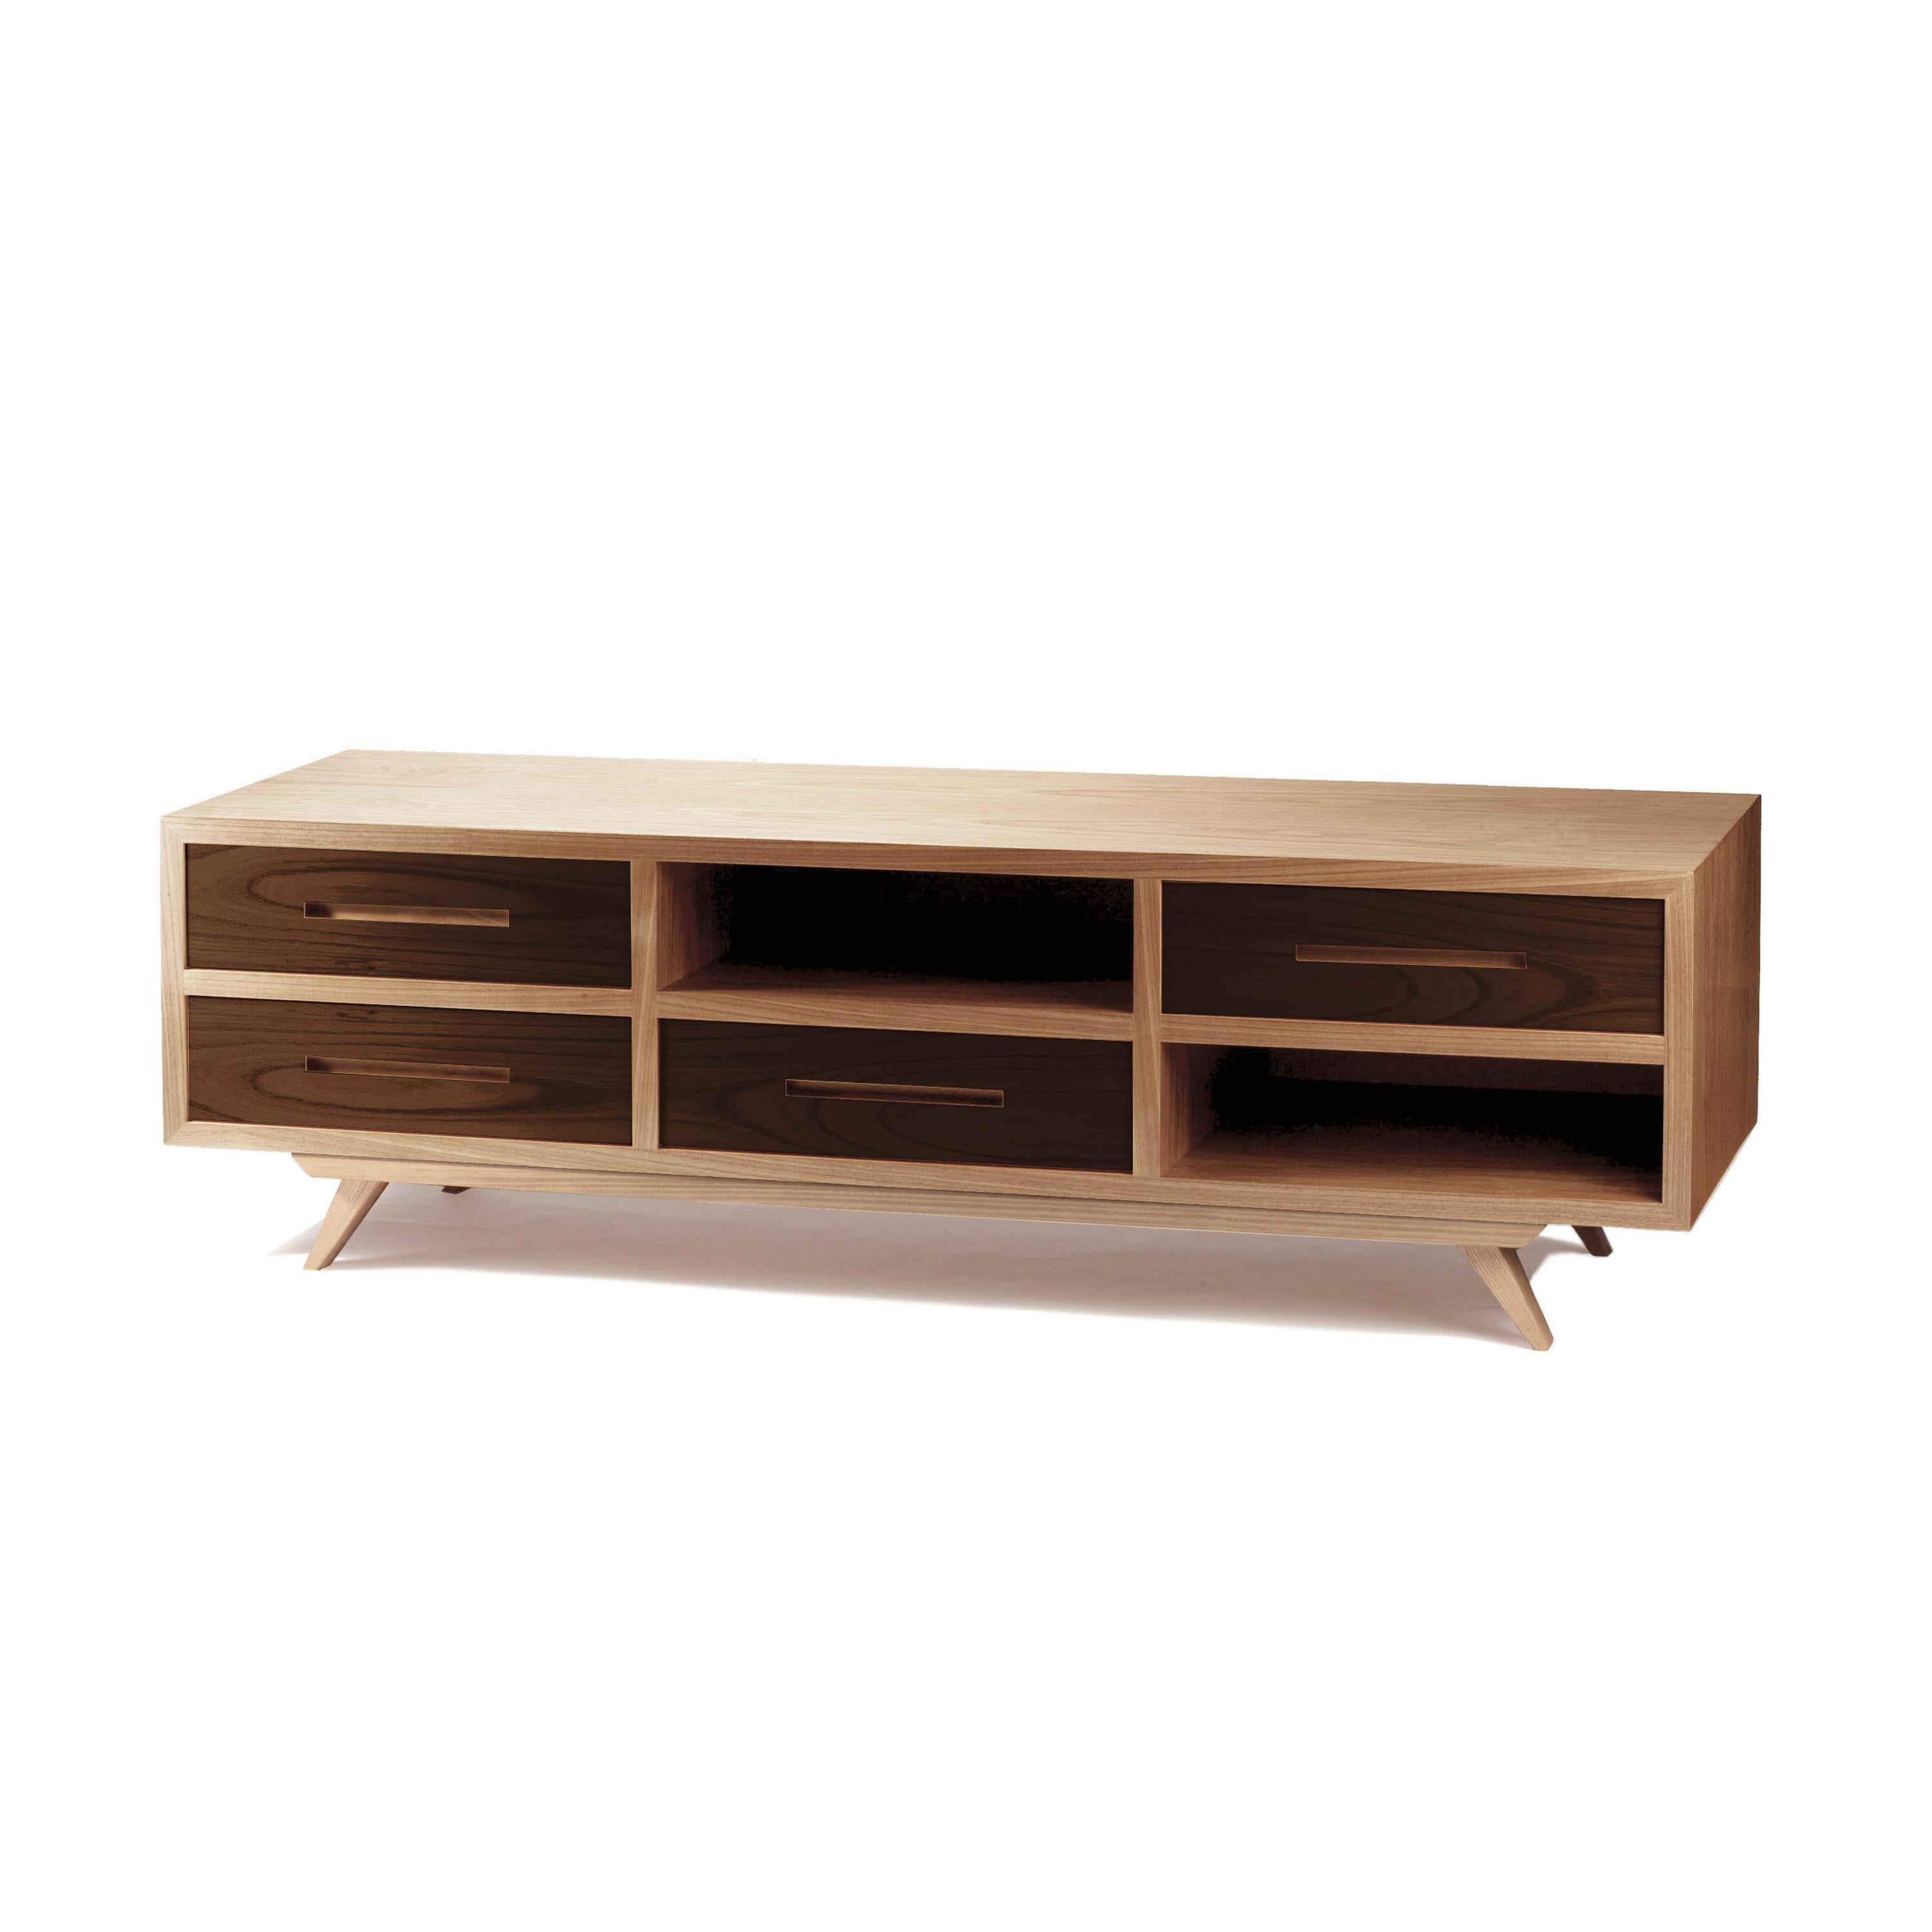 Space tv stand is a high quality product by Mambo Unlimited Ideas, crafted in natural oak and natural walnut plywood veneer. It features four drawers and two shelves and has a clear inspiration in midcentury design, with cleaner modern lines. Made